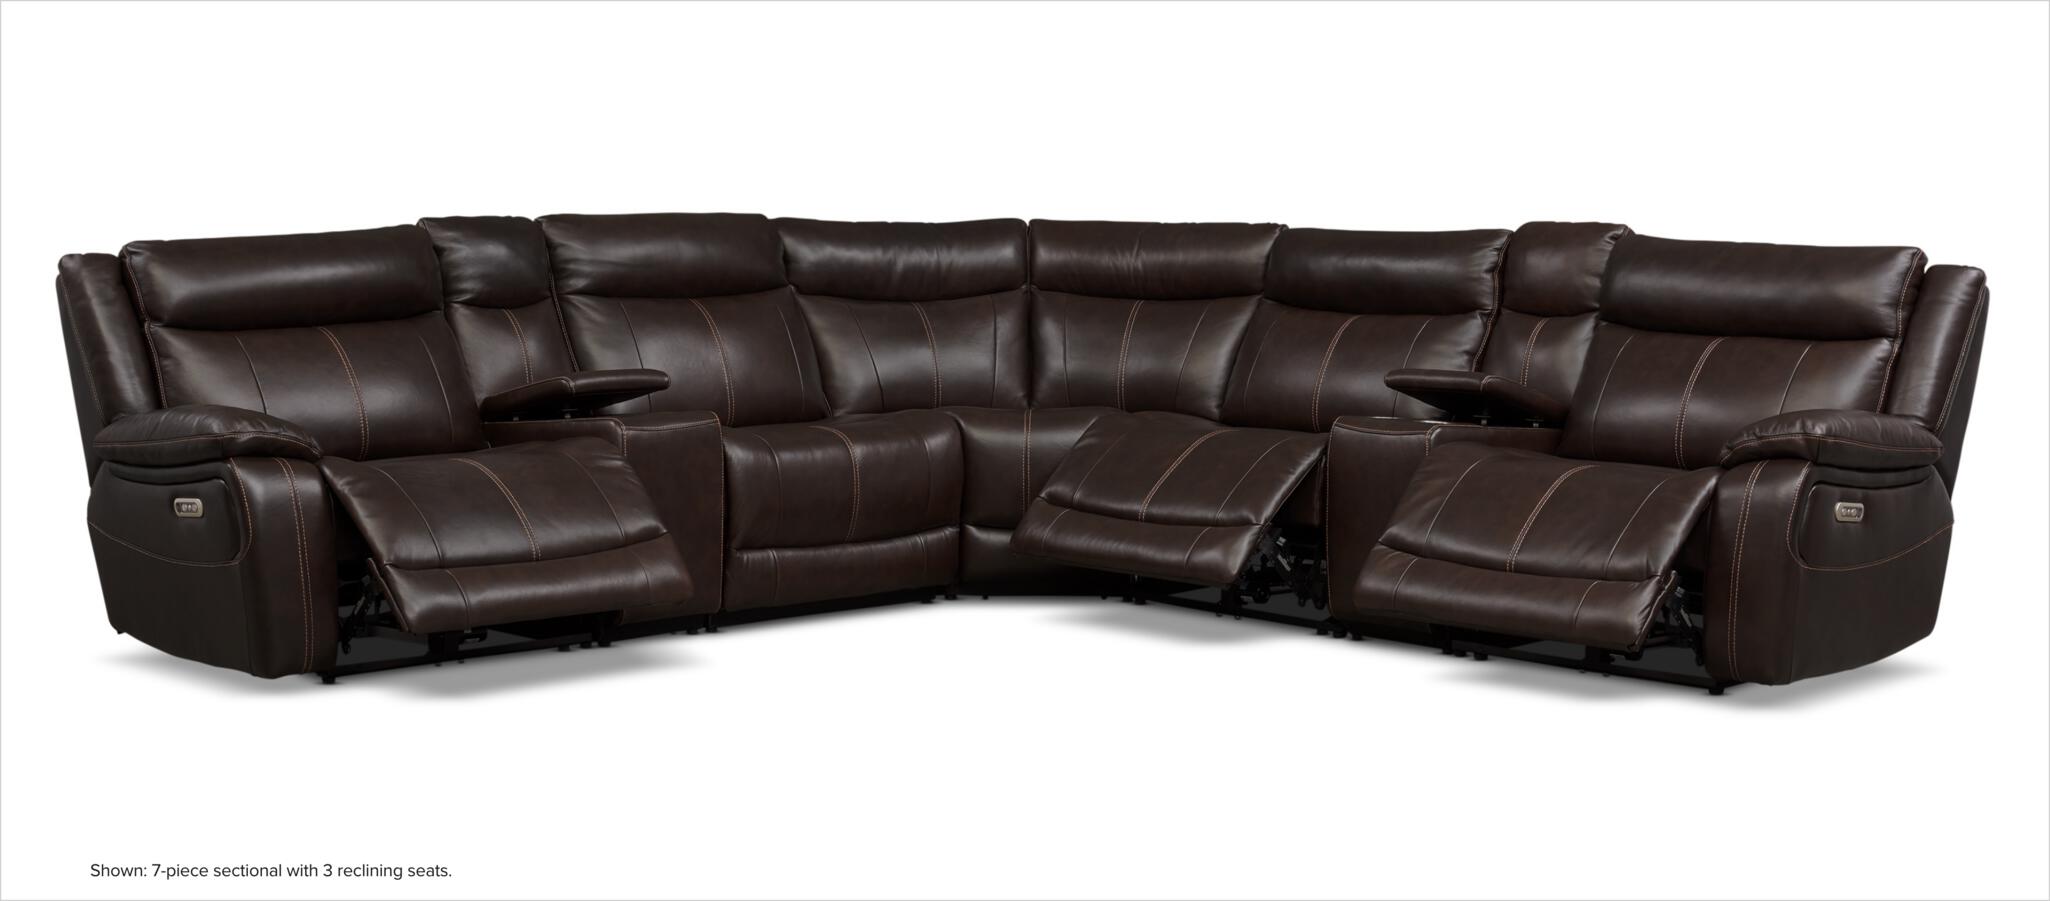 Vince 7-piece sectional with 3 reclining seats.